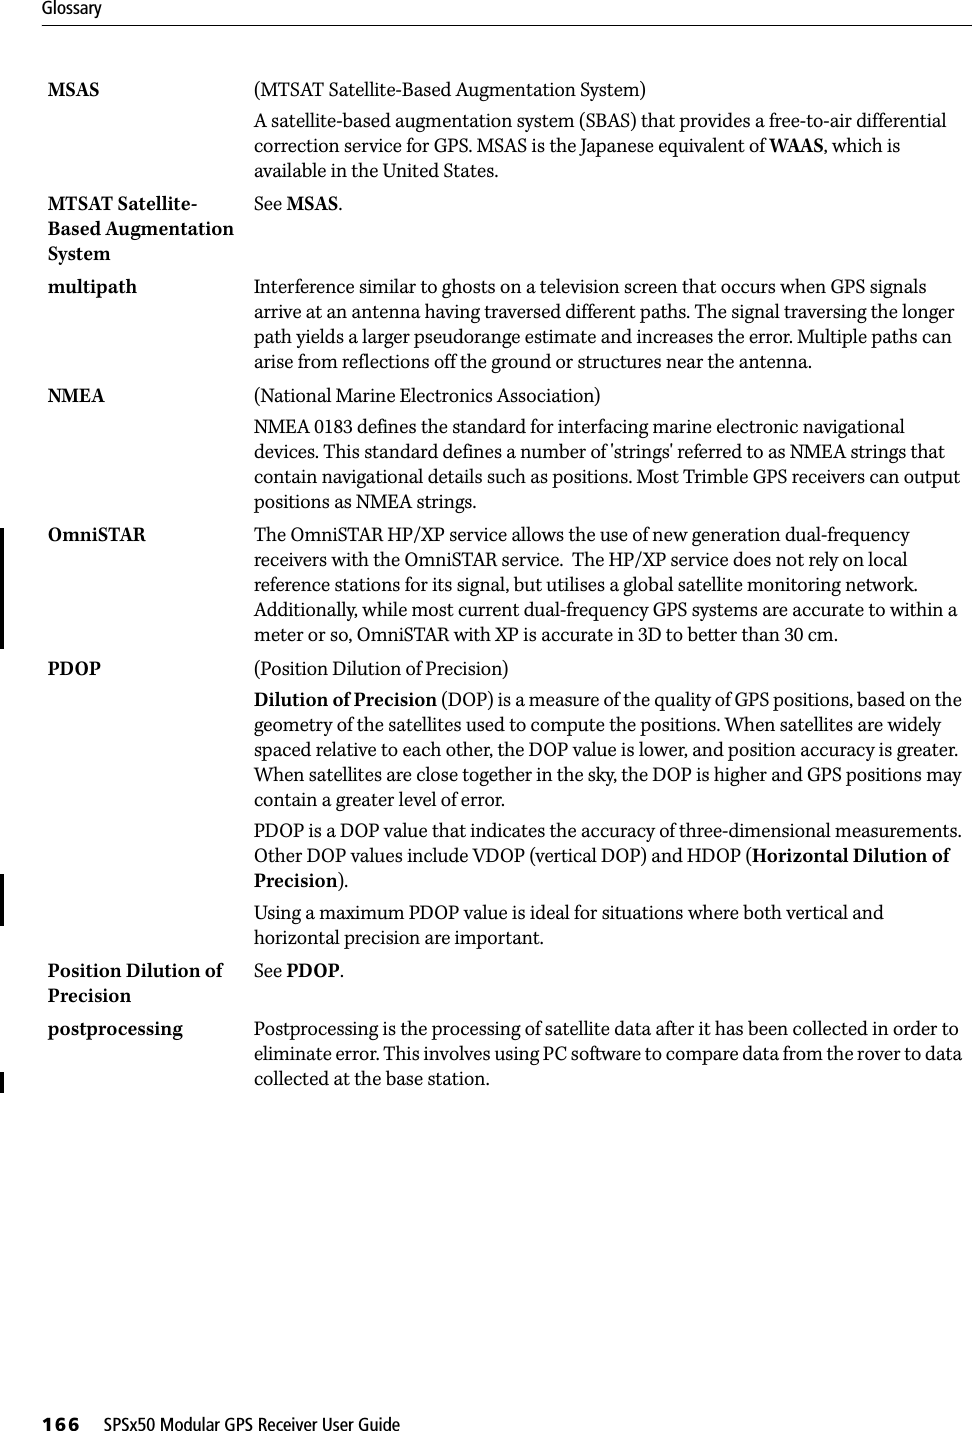 Glossary166     SPSx50 Modular GPS Receiver User GuideMSAS (MTSAT Satellite-Based Augmentation System)A satellite-based augmentation system (SBAS) that provides a free-to-air differential correction service for GPS. MSAS is the Japanese equivalent of WAAS, which is available in the United States. MTSAT Satellite-Based Augmentation System See MSAS.multipath Interference similar to ghosts on a television screen that occurs when GPS signals arrive at an antenna having traversed different paths. The signal traversing the longer path yields a larger pseudorange estimate and increases the error. Multiple paths can arise from reflections off the ground or structures near the antenna.NMEA (National Marine Electronics Association)NMEA 0183 defines the standard for interfacing marine electronic navigational devices. This standard defines a number of &apos;strings&apos; referred to as NMEA strings that contain navigational details such as positions. Most Trimble GPS receivers can output positions as NMEA strings.OmniSTAR The OmniSTAR HP/XP service allows the use of new generation dual-frequency receivers with the OmniSTAR service.  The HP/XP service does not rely on local reference stations for its signal, but utilises a global satellite monitoring network.  Additionally, while most current dual-frequency GPS systems are accurate to within a meter or so, OmniSTAR with XP is accurate in 3D to better than 30 cm. PDOP  (Position Dilution of Precision)Dilution of Precision (DOP) is a measure of the quality of GPS positions, based on the geometry of the satellites used to compute the positions. When satellites are widely spaced relative to each other, the DOP value is lower, and position accuracy is greater. When satellites are close together in the sky, the DOP is higher and GPS positions may contain a greater level of error. PDOP is a DOP value that indicates the accuracy of three-dimensional measurements. Other DOP values include VDOP (vertical DOP) and HDOP (Horizontal Dilution of Precision).Using a maximum PDOP value is ideal for situations where both vertical and horizontal precision are important.Position Dilution of PrecisionSee PDOP. postprocessing  Postprocessing is the processing of satellite data after it has been collected in order to eliminate error. This involves using PC software to compare data from the rover to data collected at the base station.